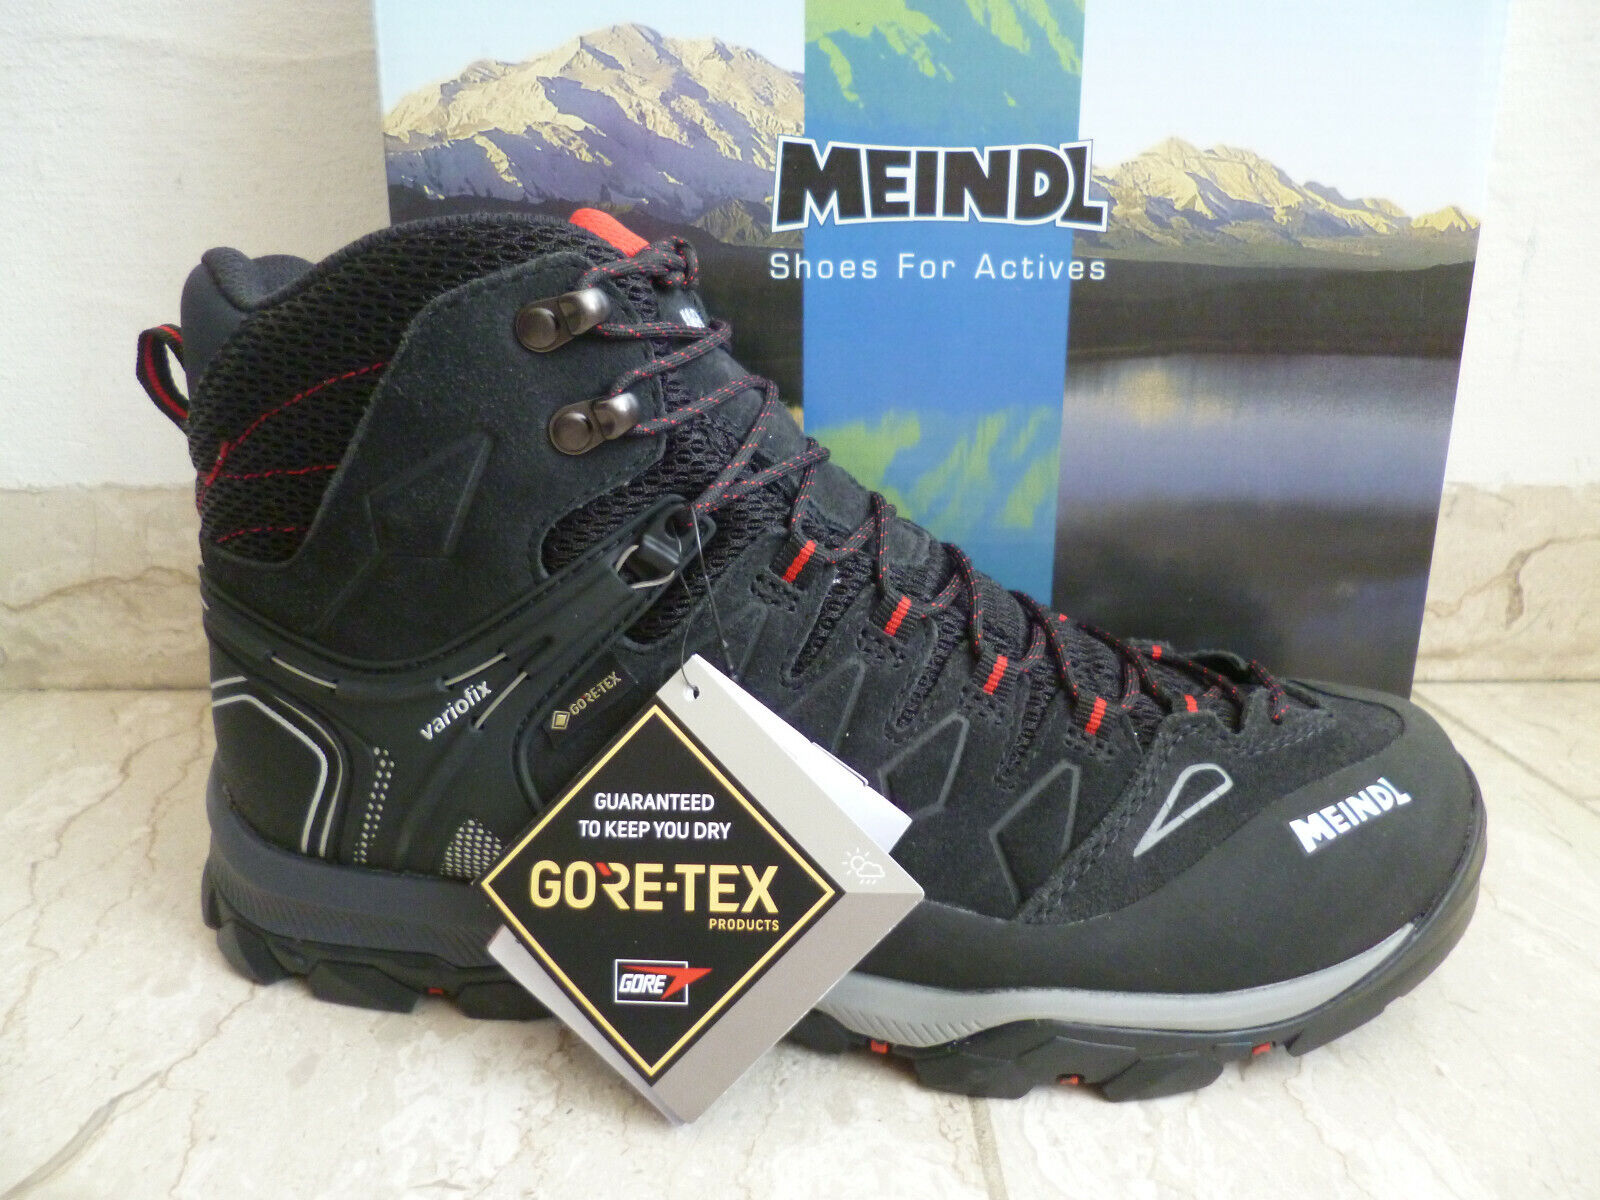 vezel op tijd Hoe dan ook Meindl Athletic Shoes Hiking Shoes Hiking Boots Gore-Tex Leather Black NEW!  | eBay